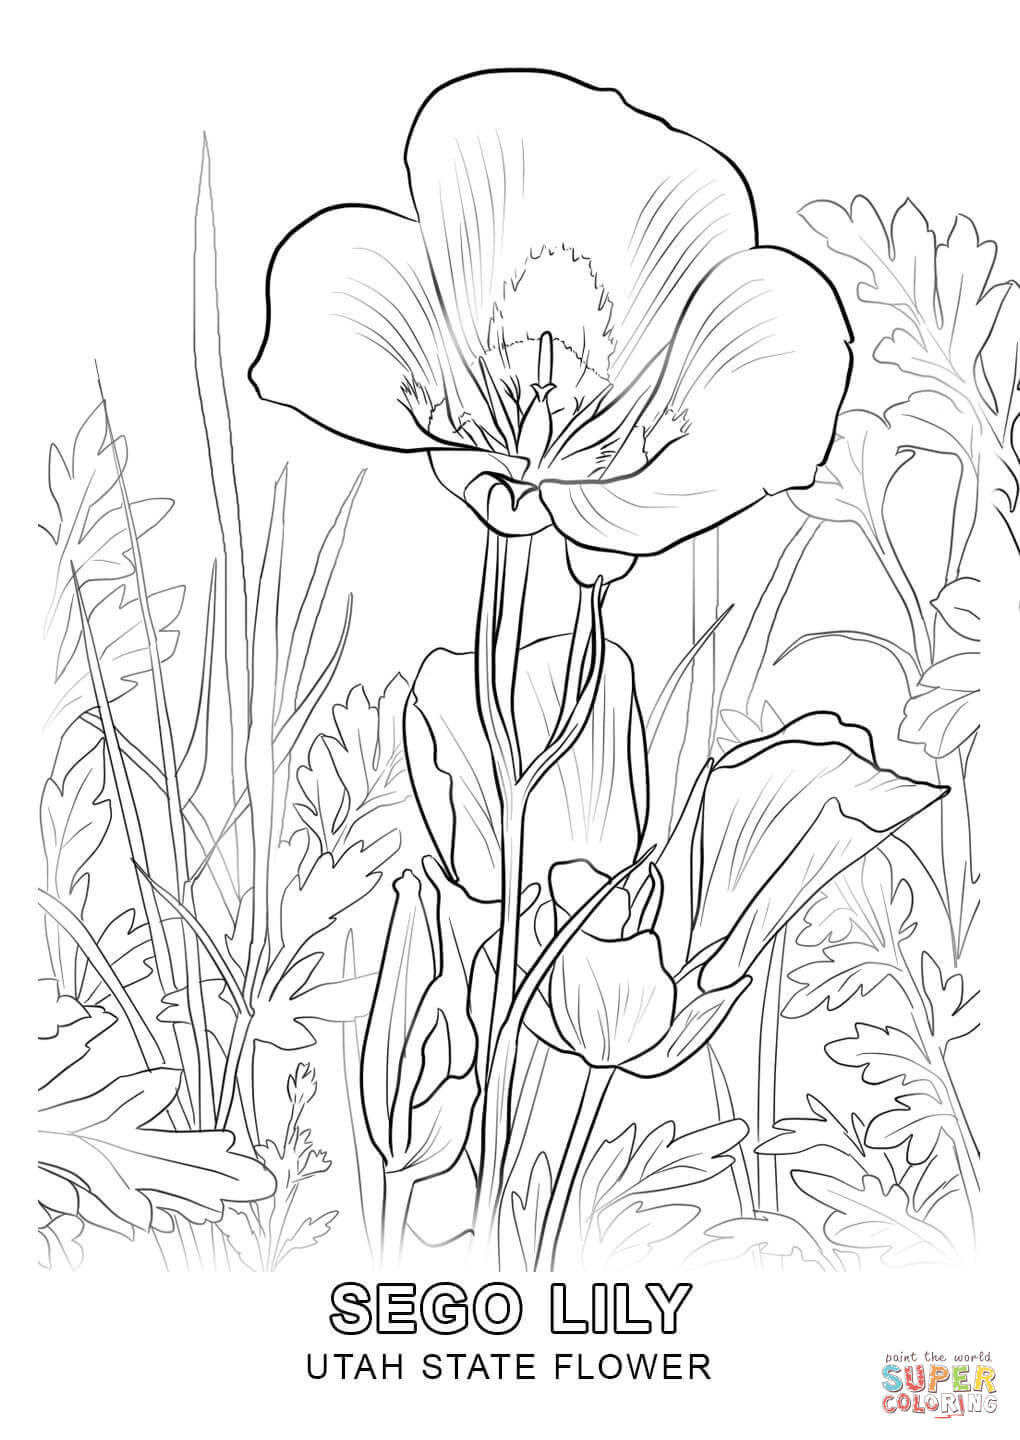 Utah State Flower coloring page | Free Printable Coloring Pages